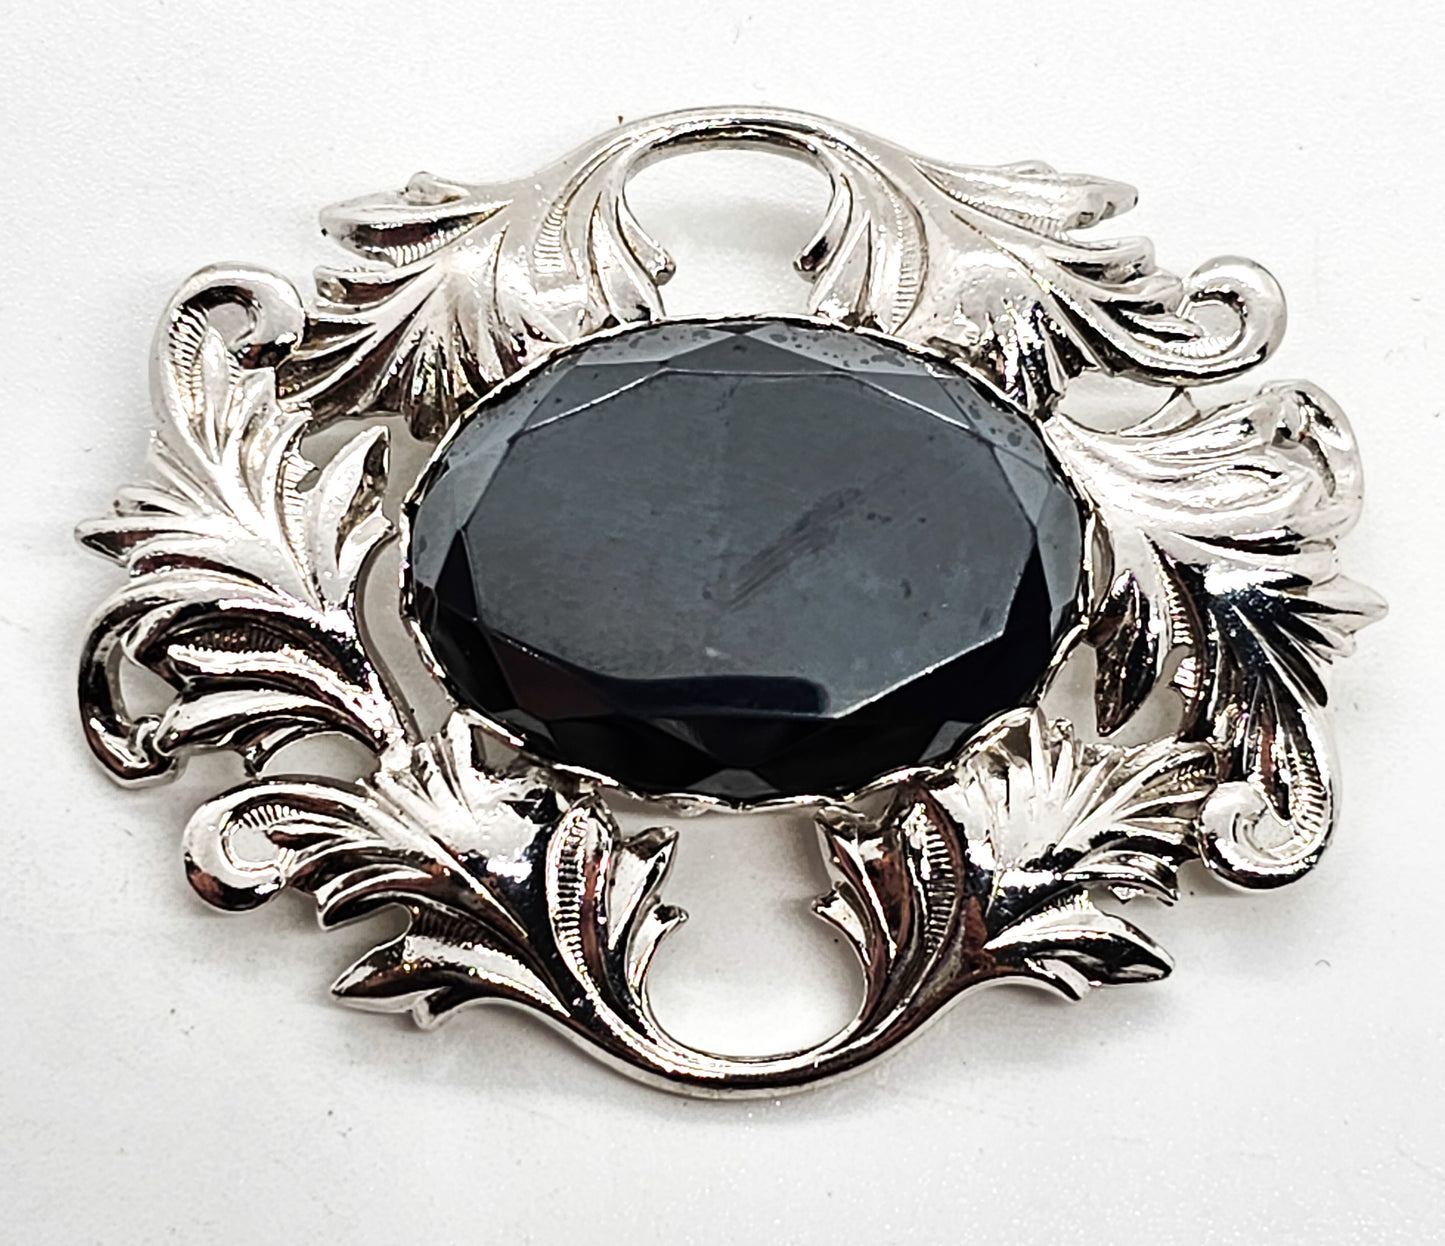 Hematite large faceted gray stone rhodium plated mid century vintage brooch